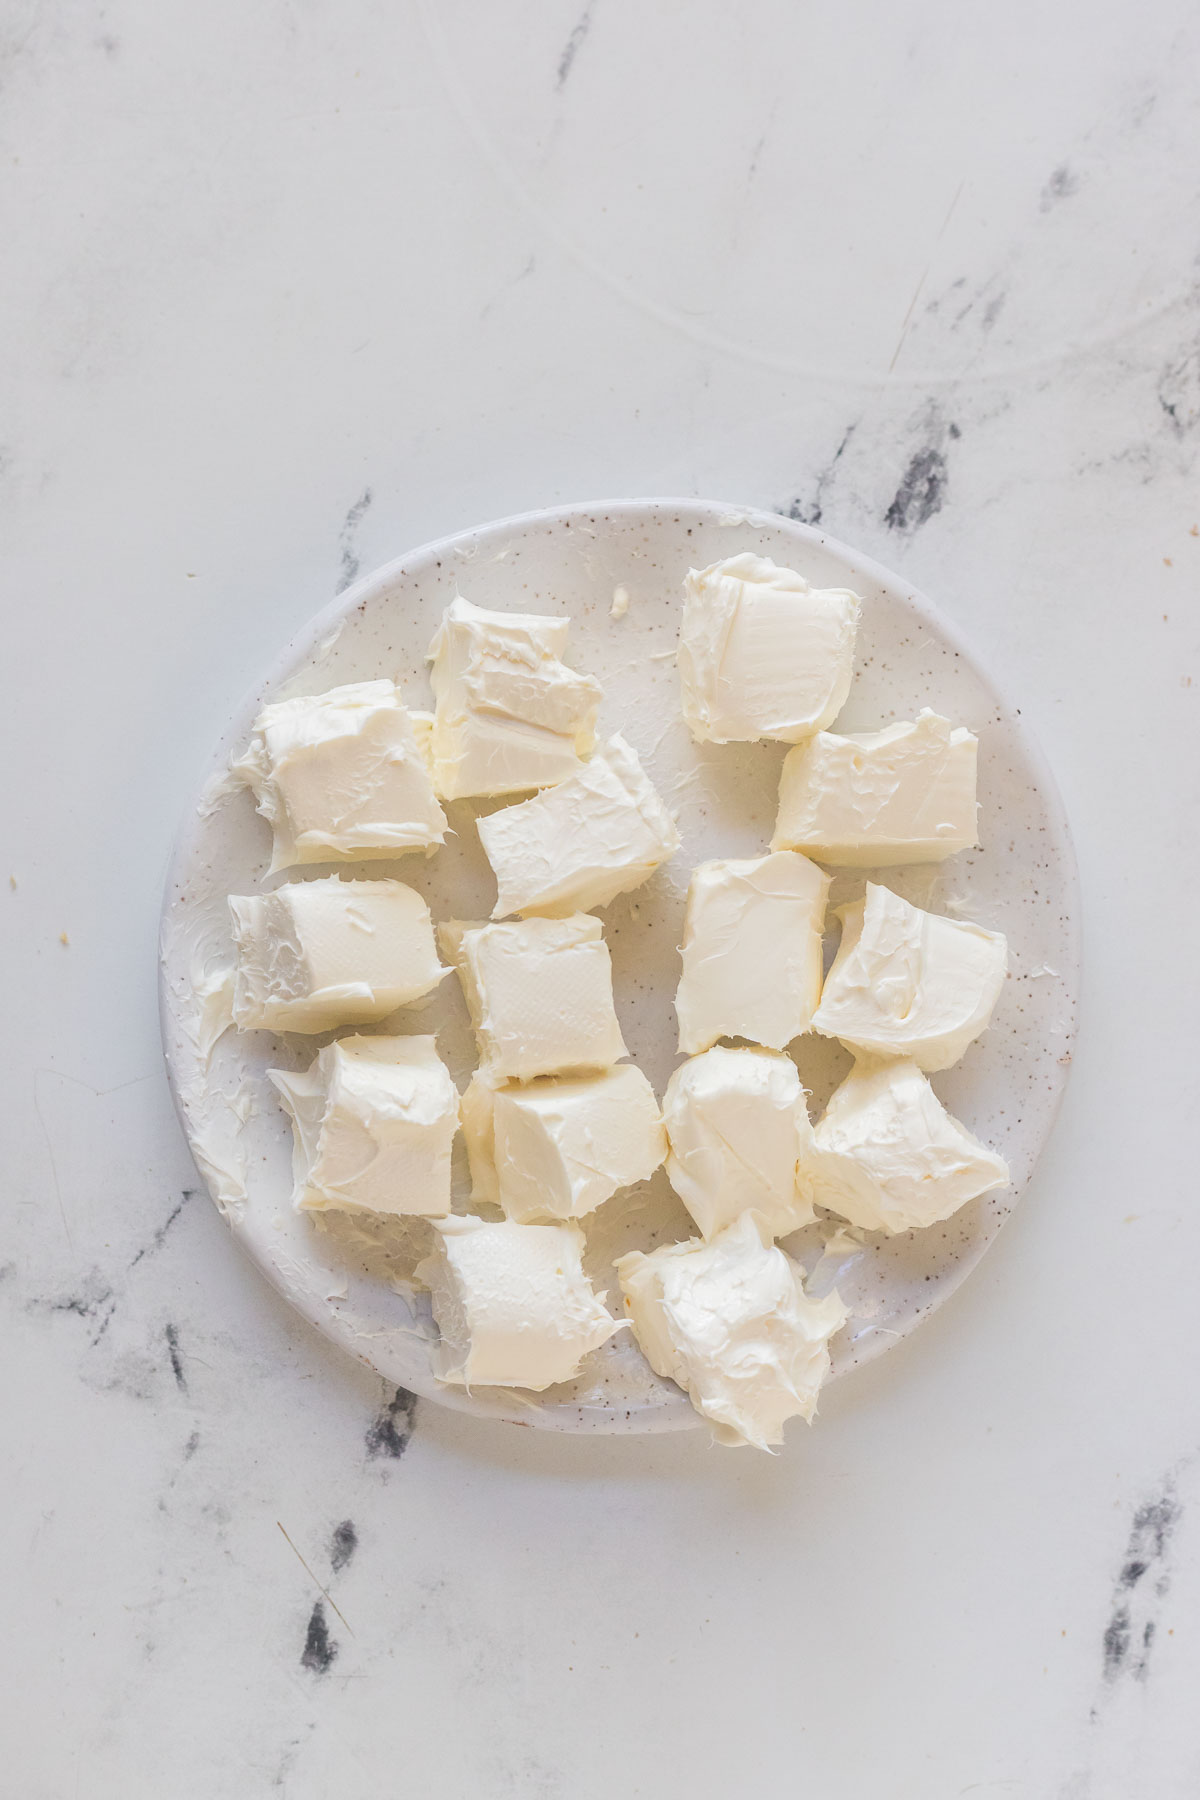 cream cheese cut into cubes on a plate